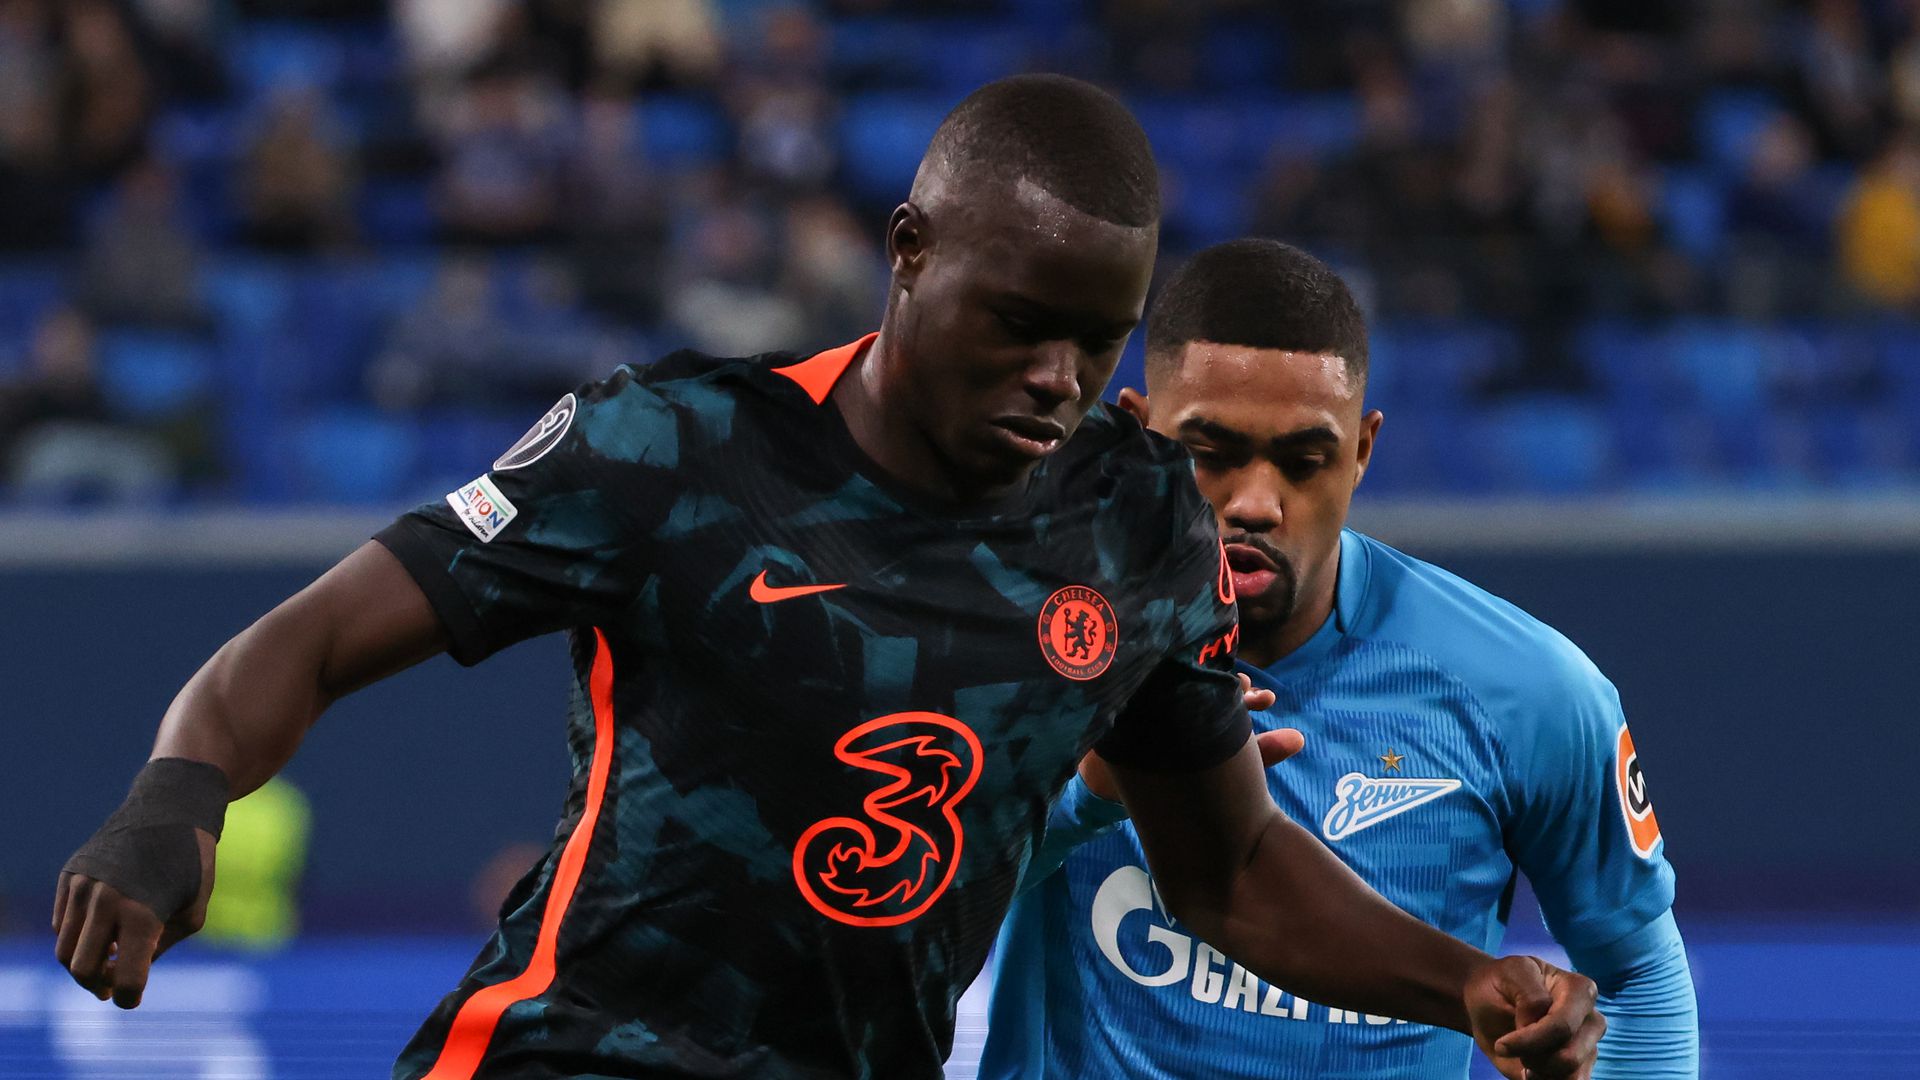 Malang Sarr is looking to leave Chelsea over concerns about lack of playtime